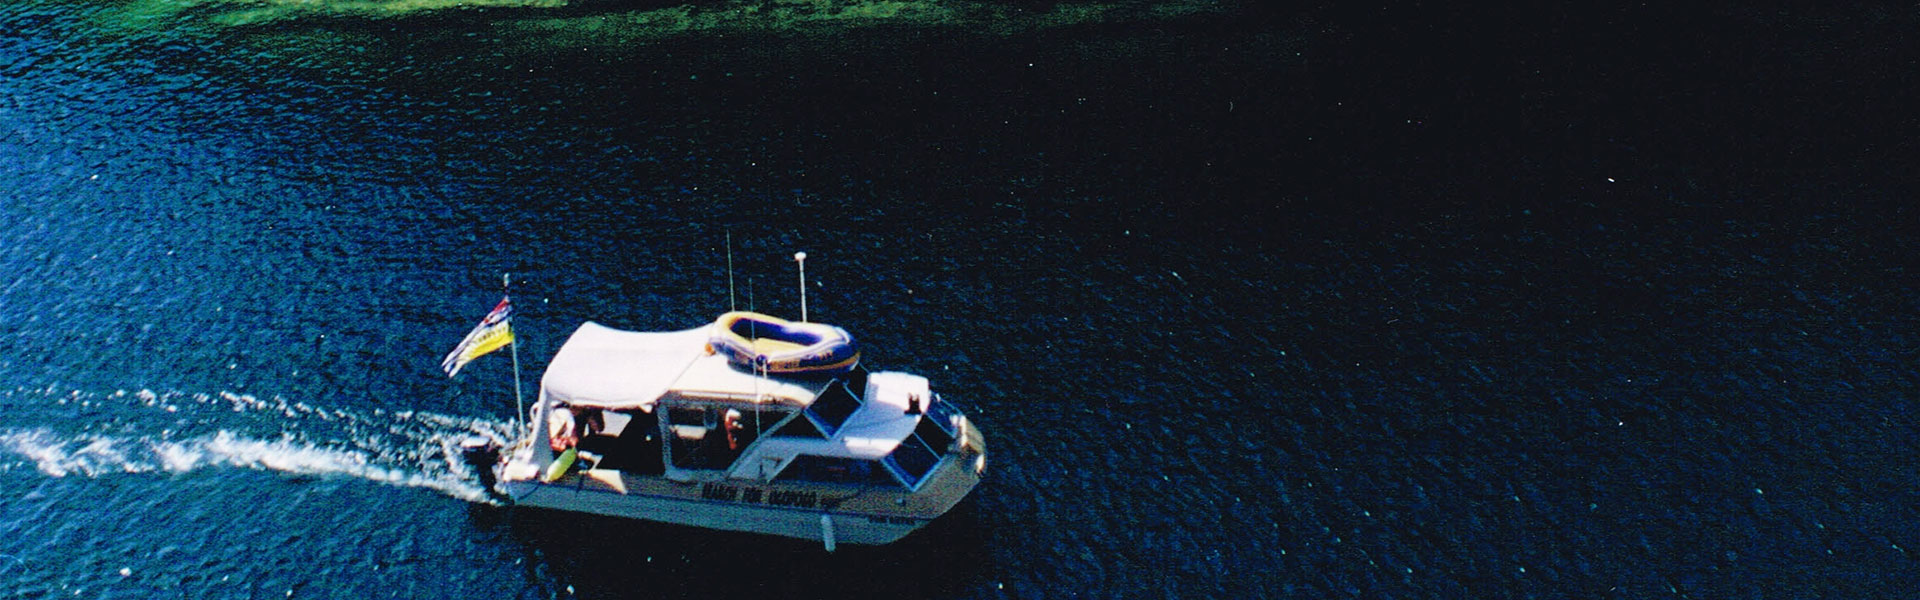 Second Legend Hunters Search For Ogopogo Expedition in August 2001.